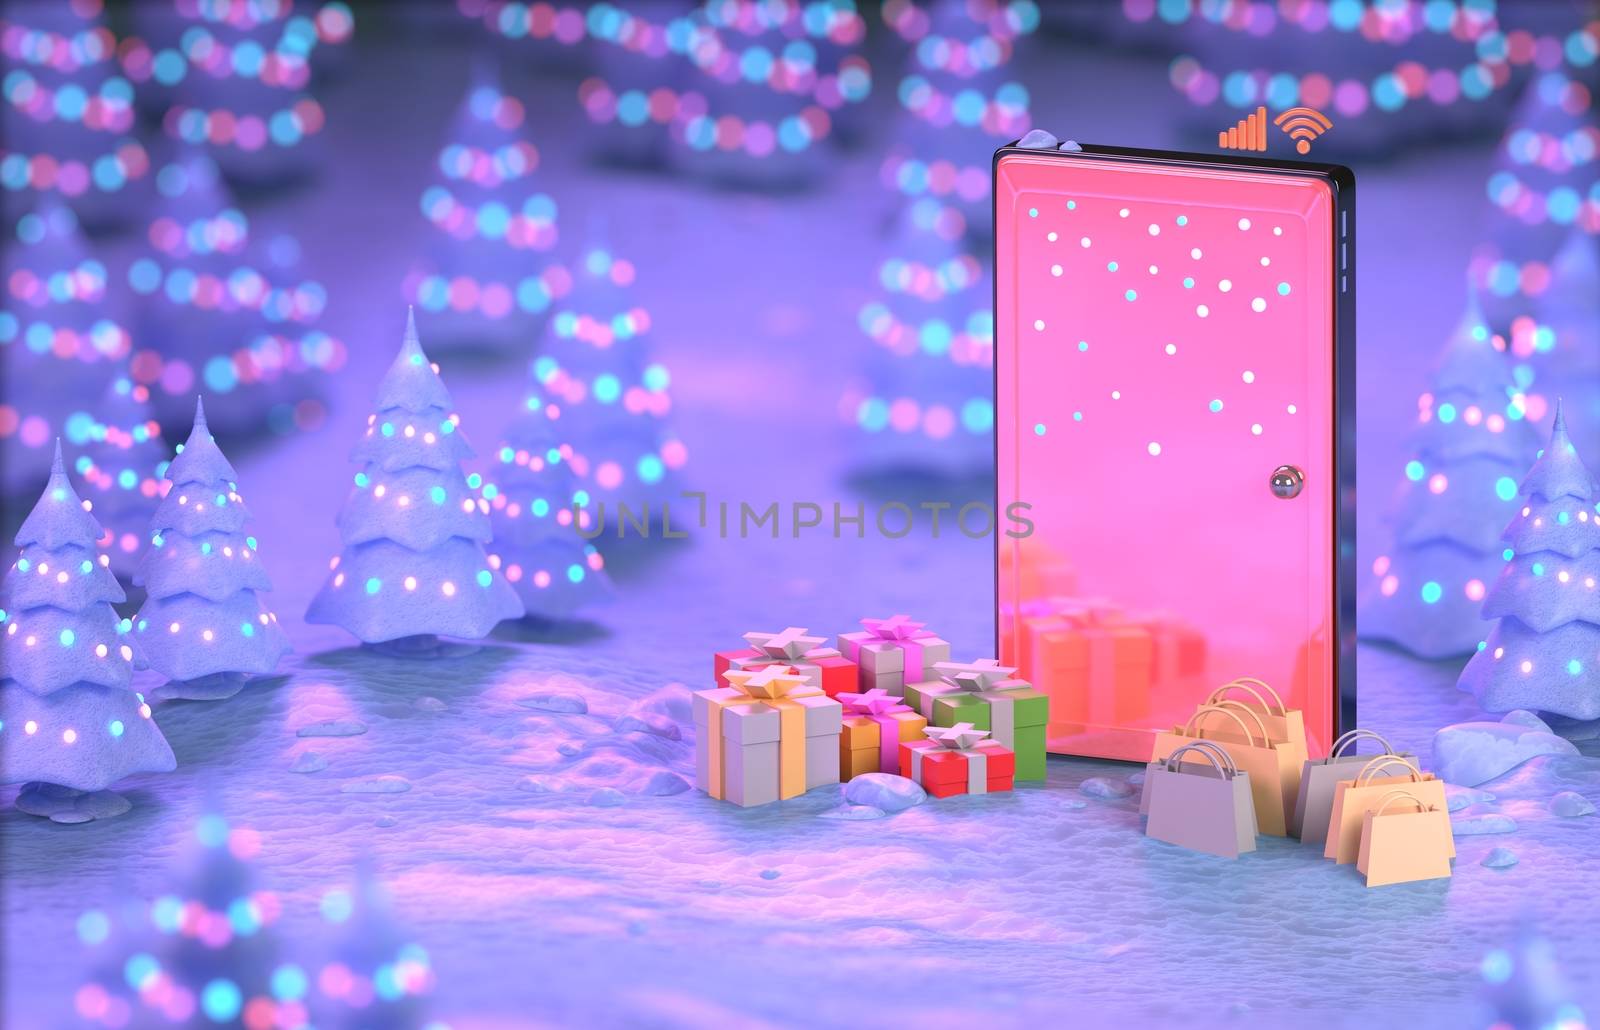 smartphone online in the winter season park. gift order app. Christmas present promotion sells. discount shopping on the internet concept. snow pink background. celebration concept. 3d illustration.